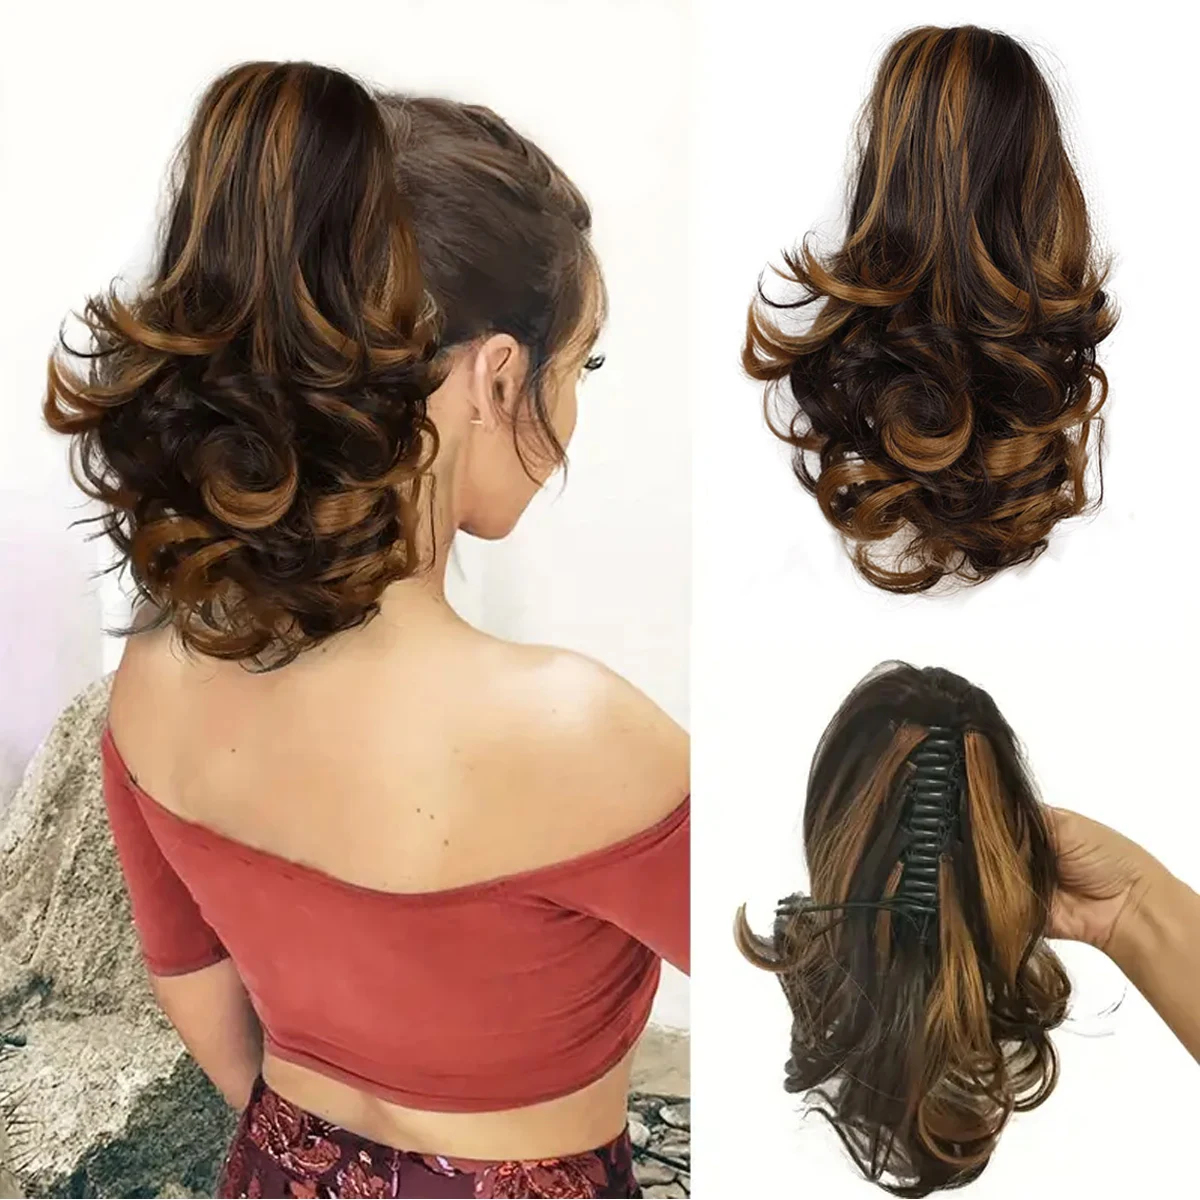 Claw Ponytail Clip in Wavy Hair Extensions Short Curly Ponytail 12 Inch Natural Wave Hair Accessories for Women Girls Daily Use